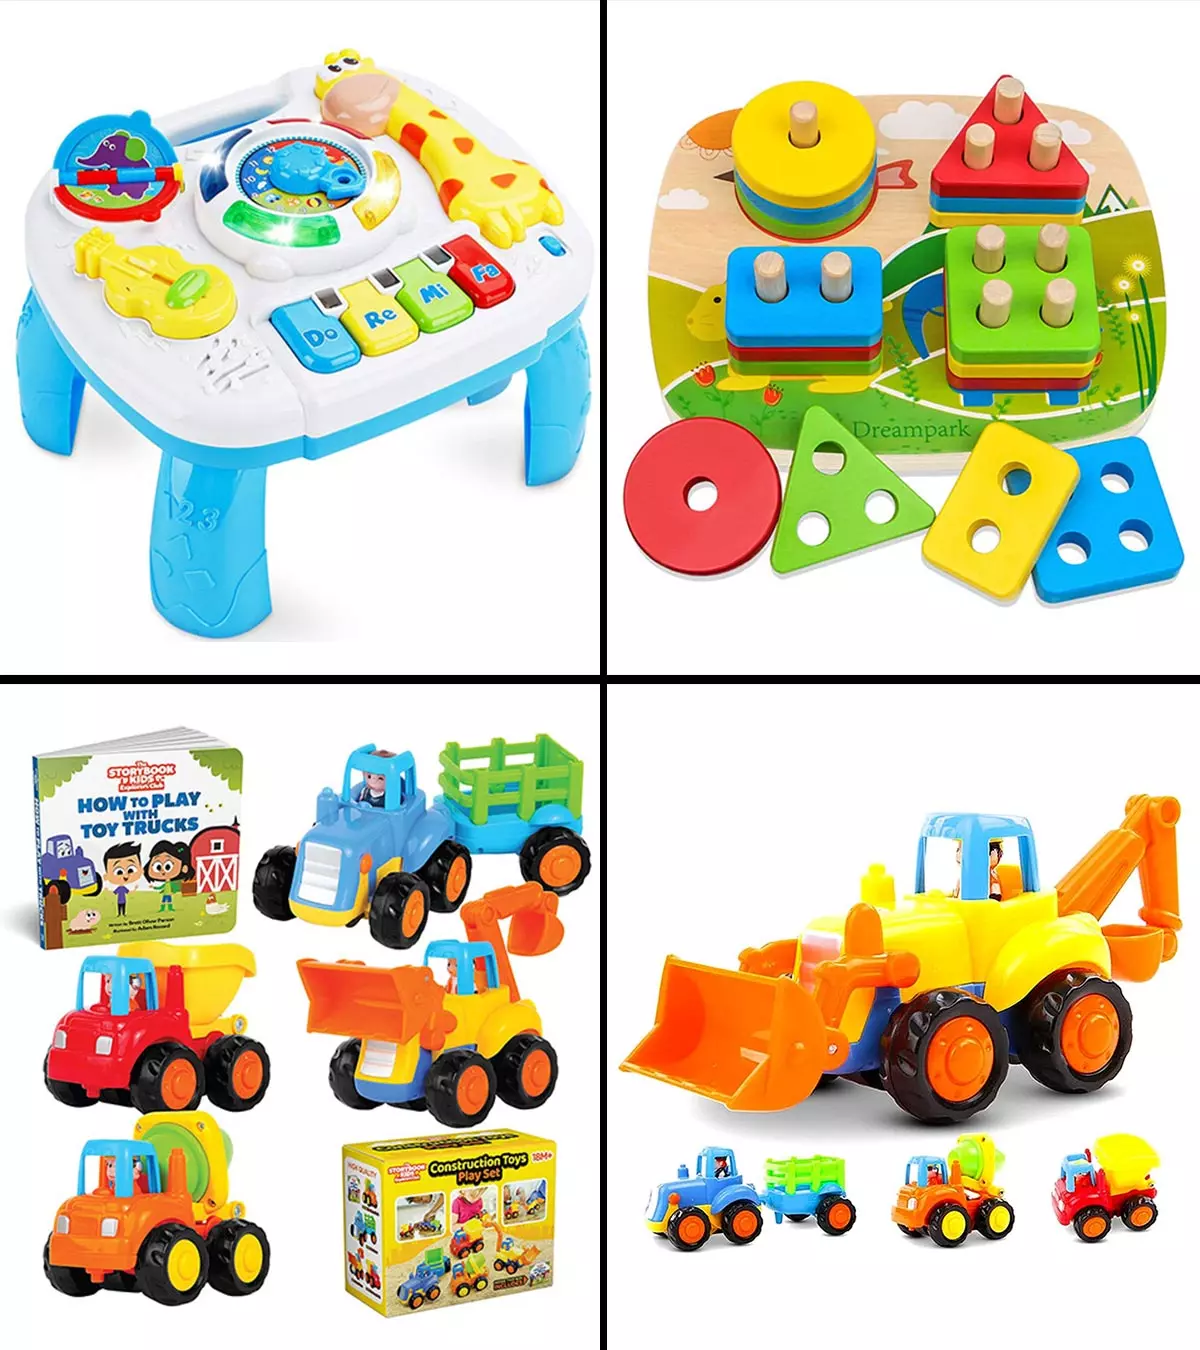 11 Best Toys For 15-Month-Old Baby in 2021